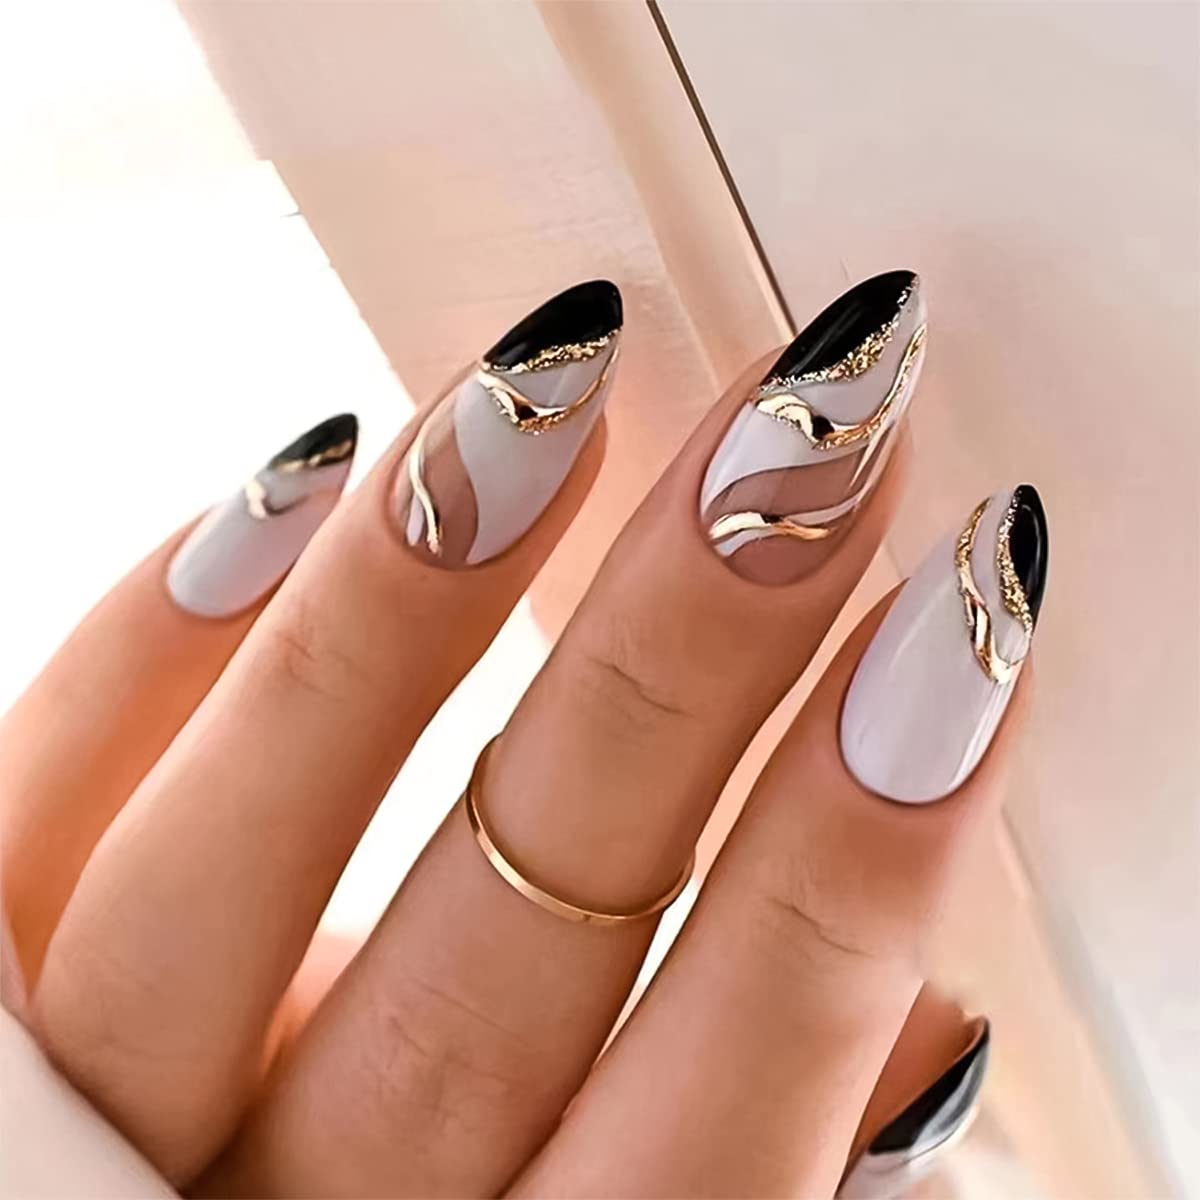 Press-on nails - Buy the best product with free shipping on AliExpress-baongoctrading.com.vn